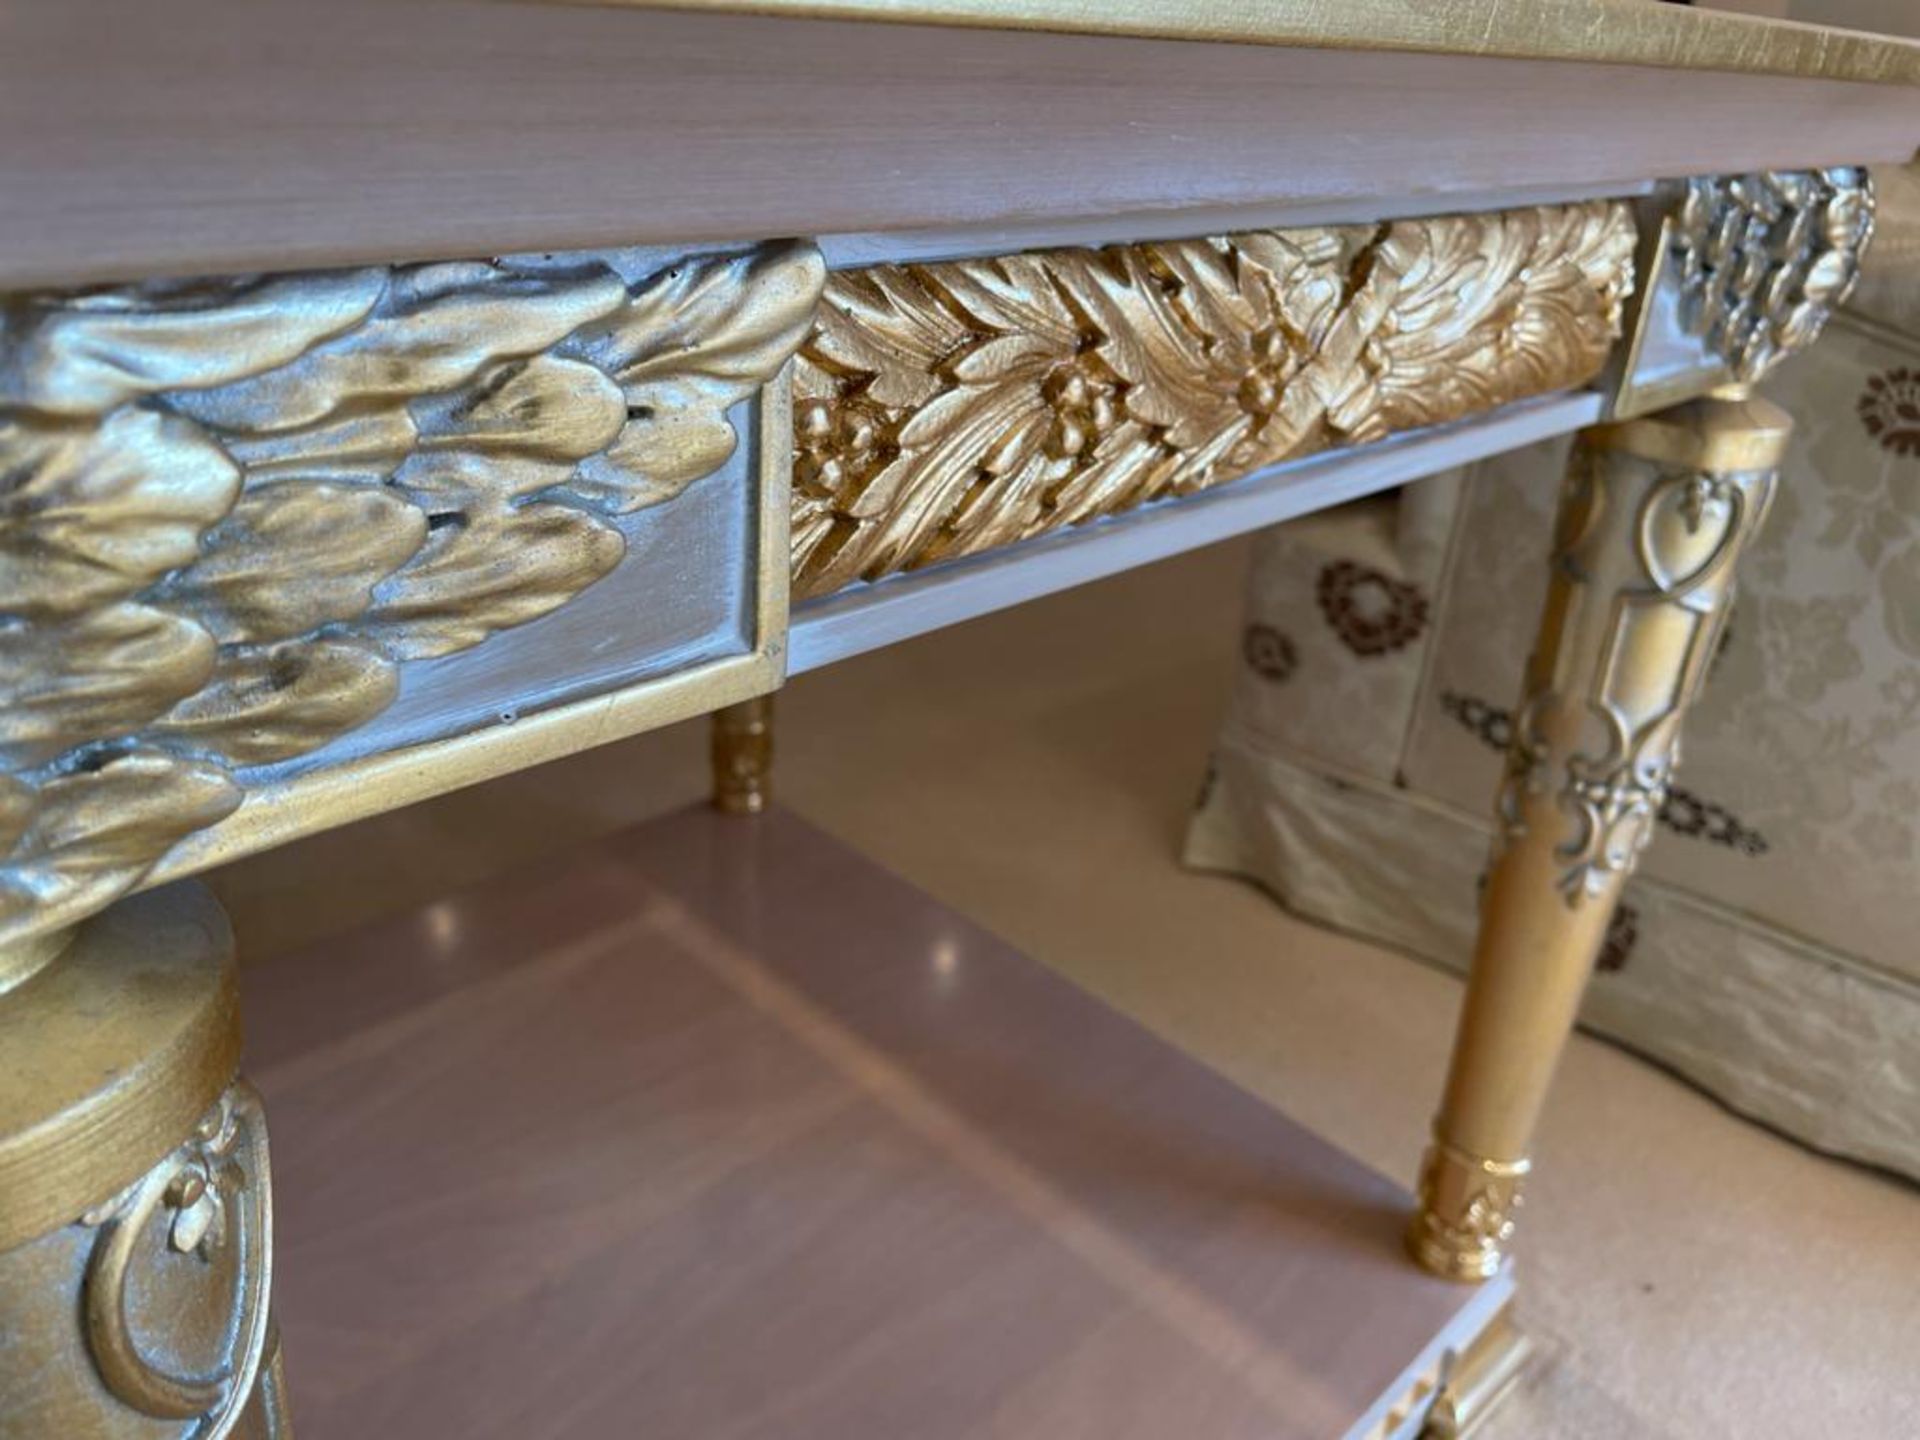 2 x Hand Carved Ornate Side Tables Complimented With Birchwood Veneer, Golden Pillar Legs, Carved - Image 13 of 13